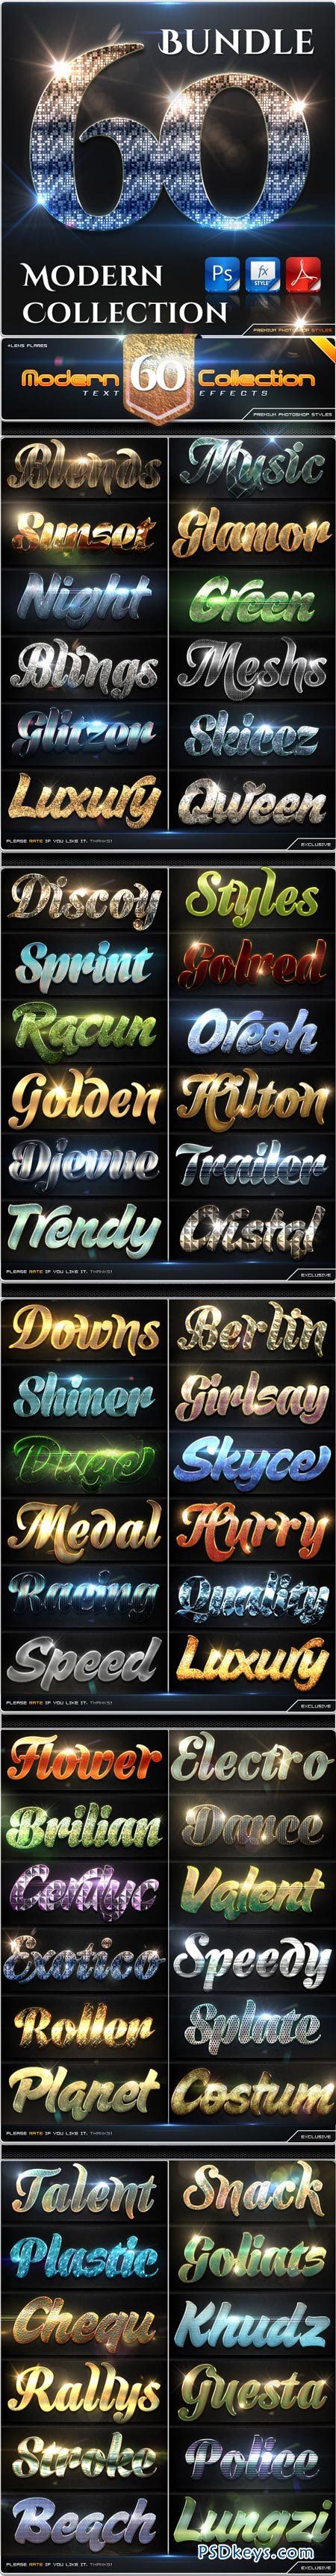 60 Modern Collection Text Effect Styles Bundle 9087182